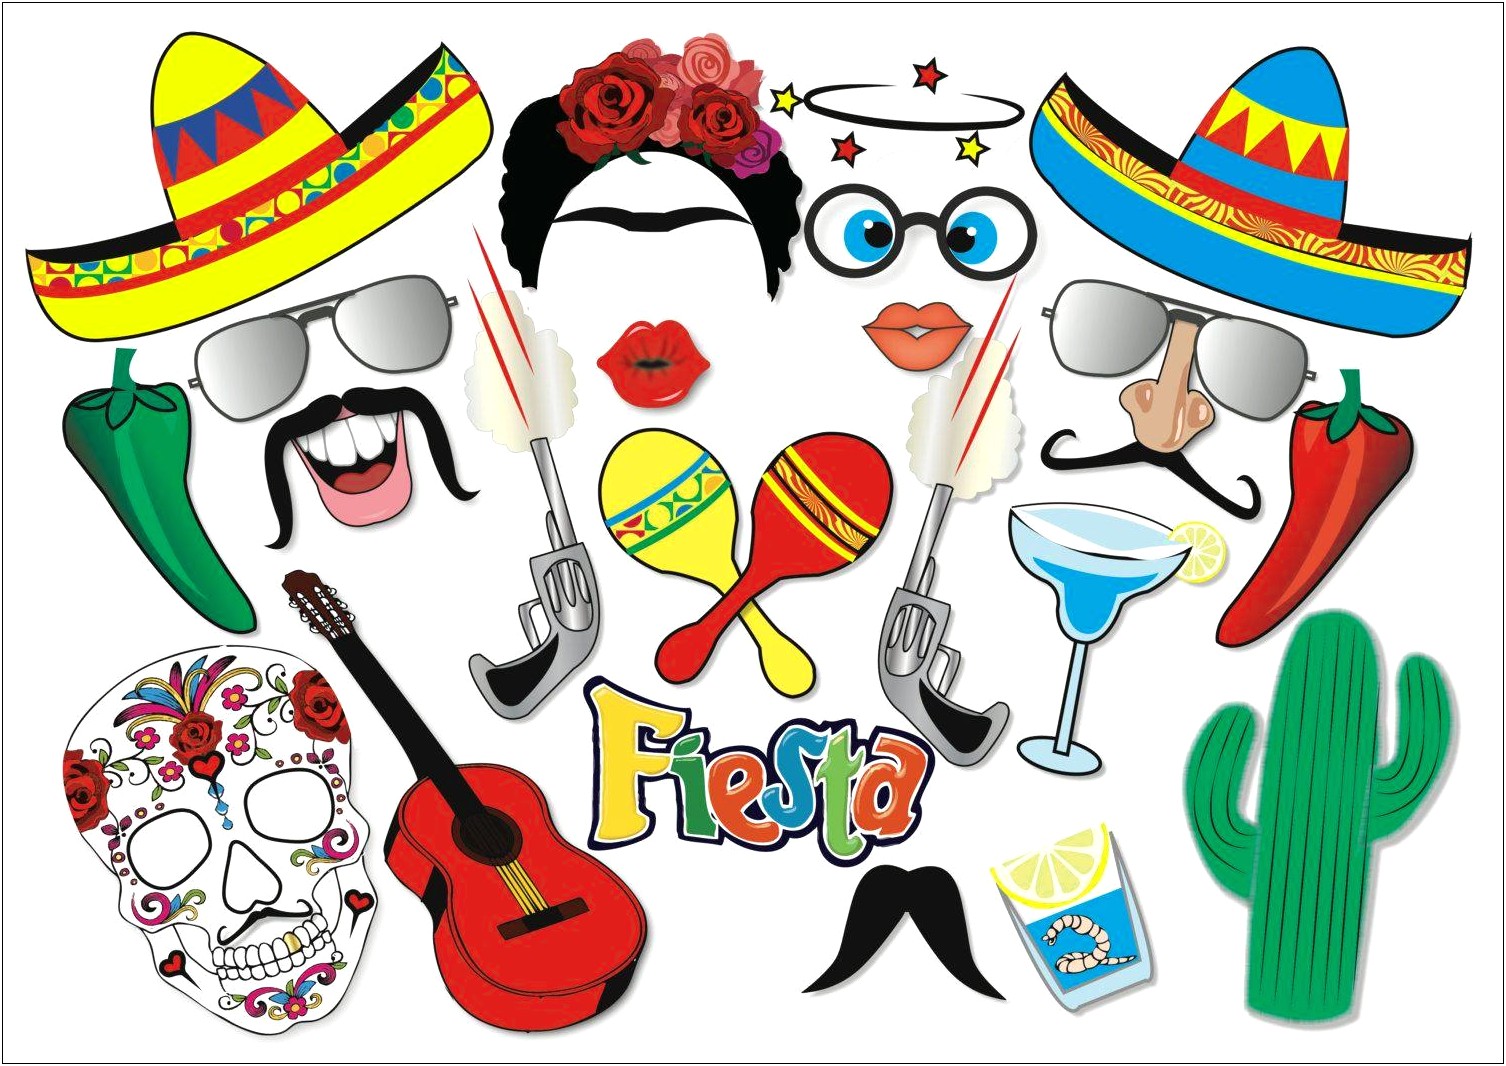 Free Fiesta Mexicana Photo Booth Template